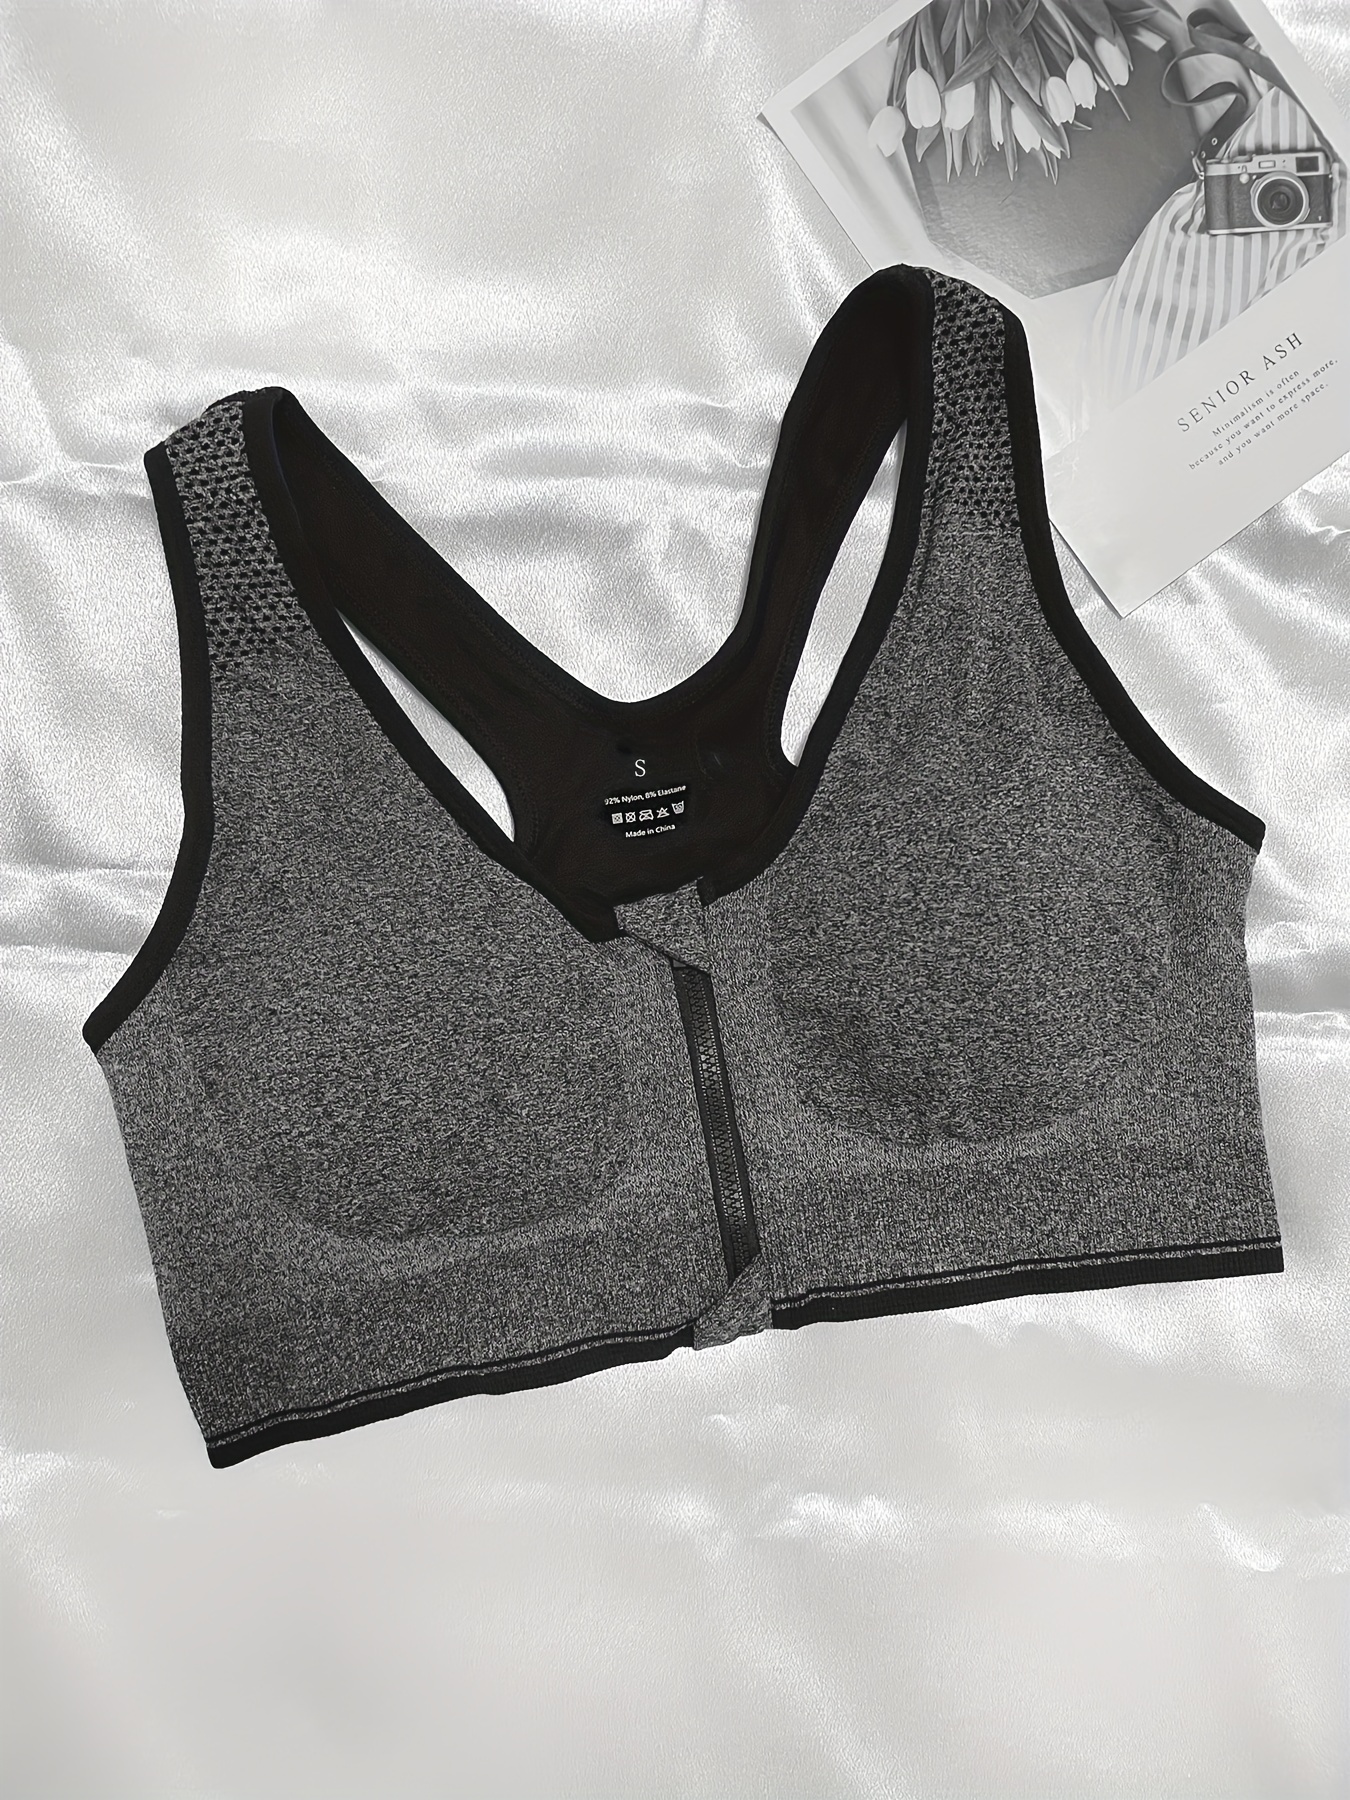 Victoria's Secret Cool & Comfy Seamless Wireless T-Back Bra Top, Women's  Fashion, Tops, Sleeveless on Carousell